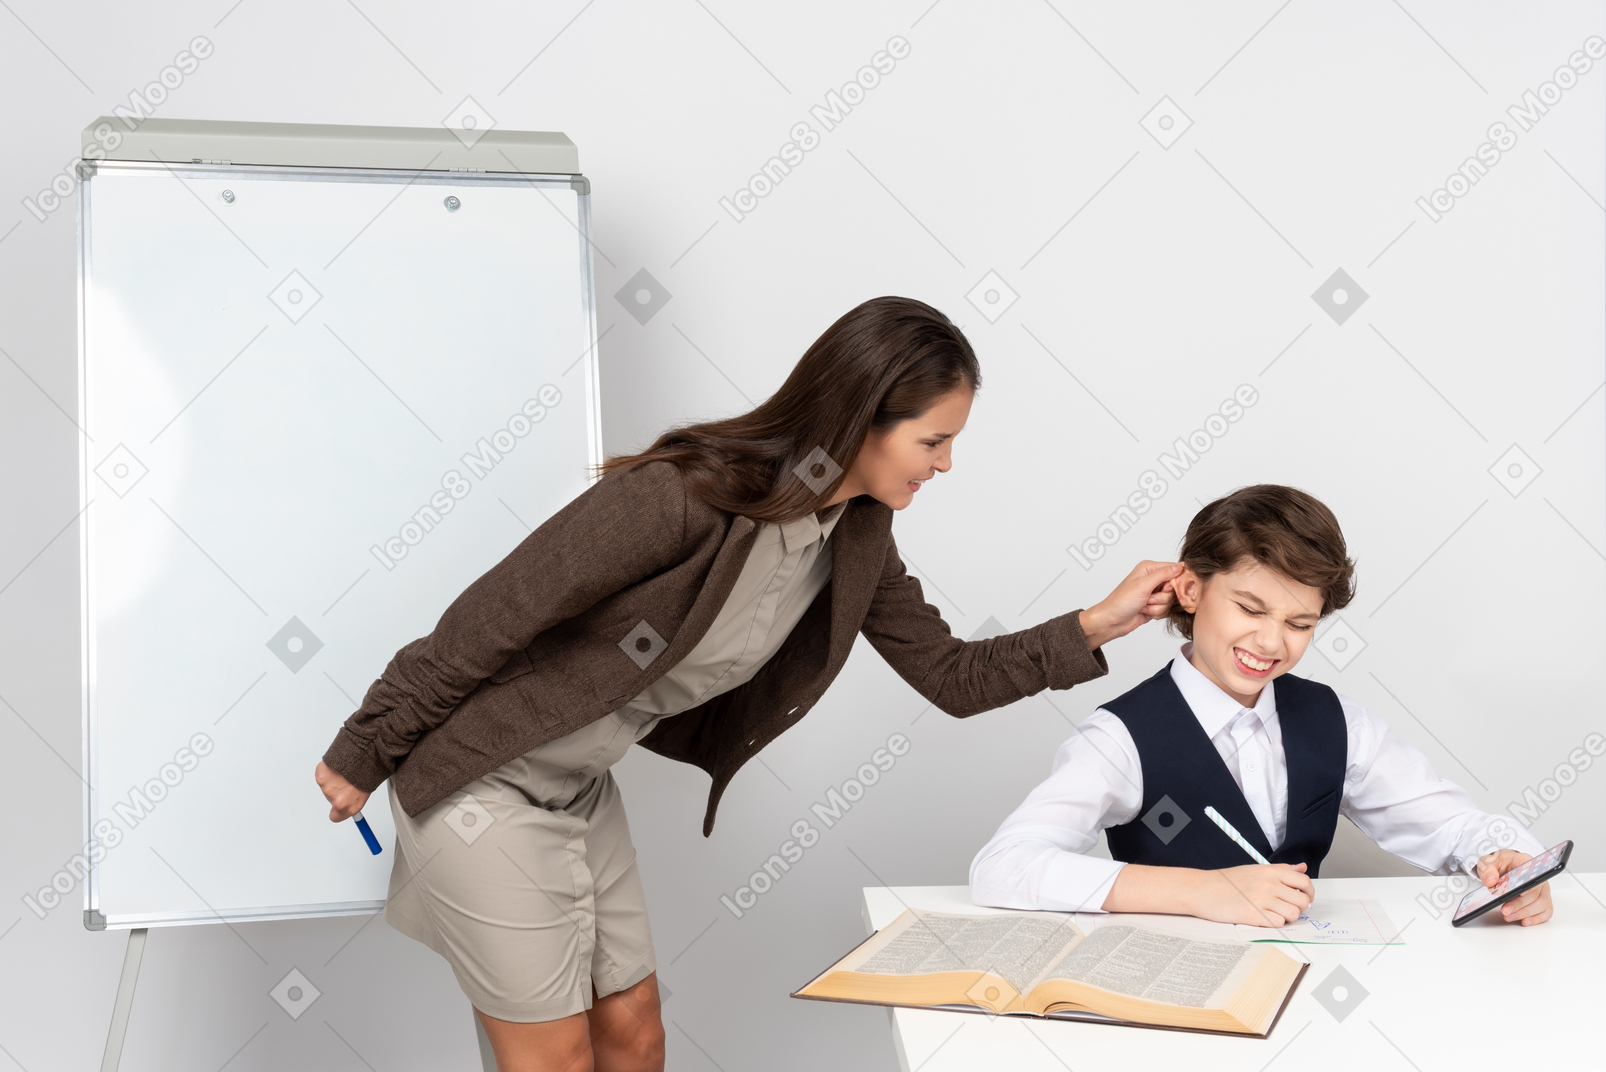 Angry young teacher pulling her pupil's ear